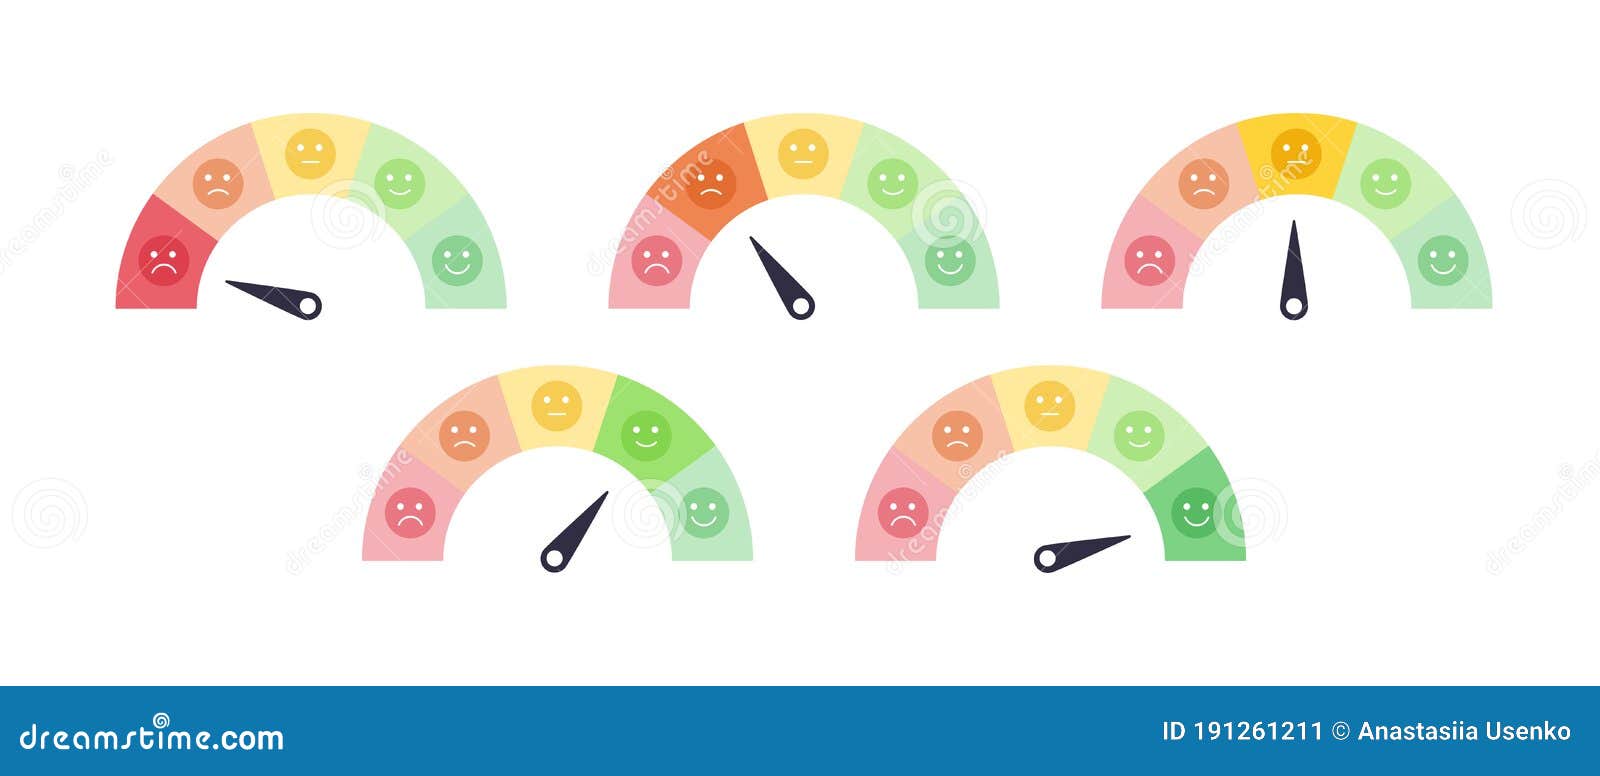  mood feedback meter set with arrow selection. face with five emotions: dissatisfied, sad, indifferent, glad, satisfied.